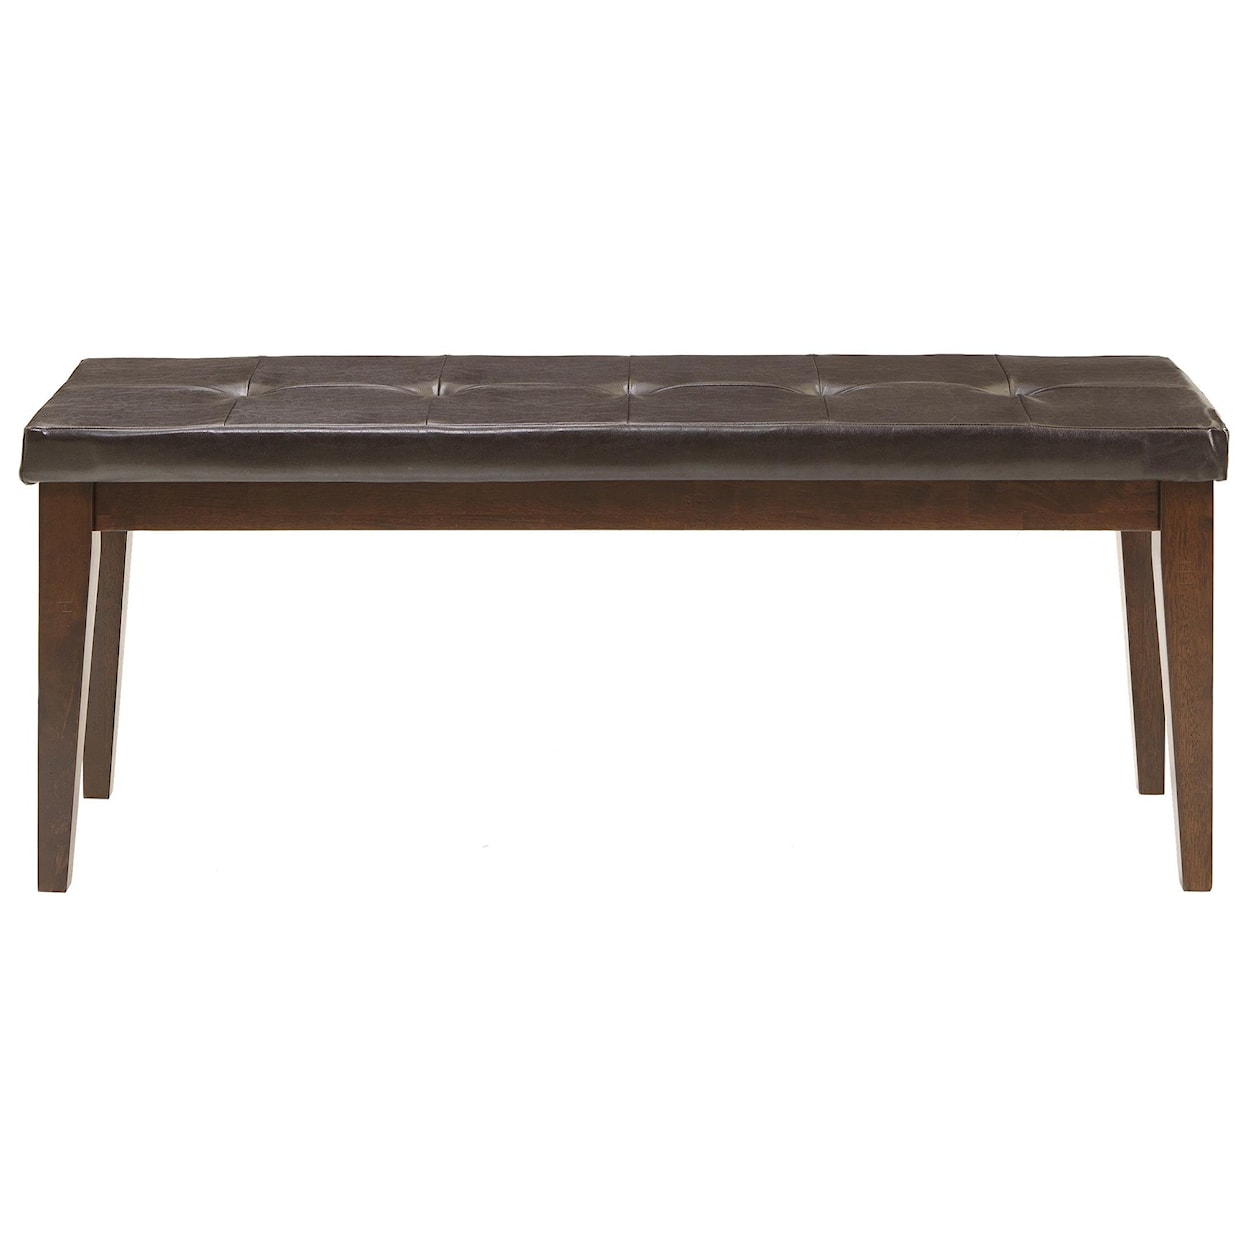 Intercon 13215 Backless Dining Bench